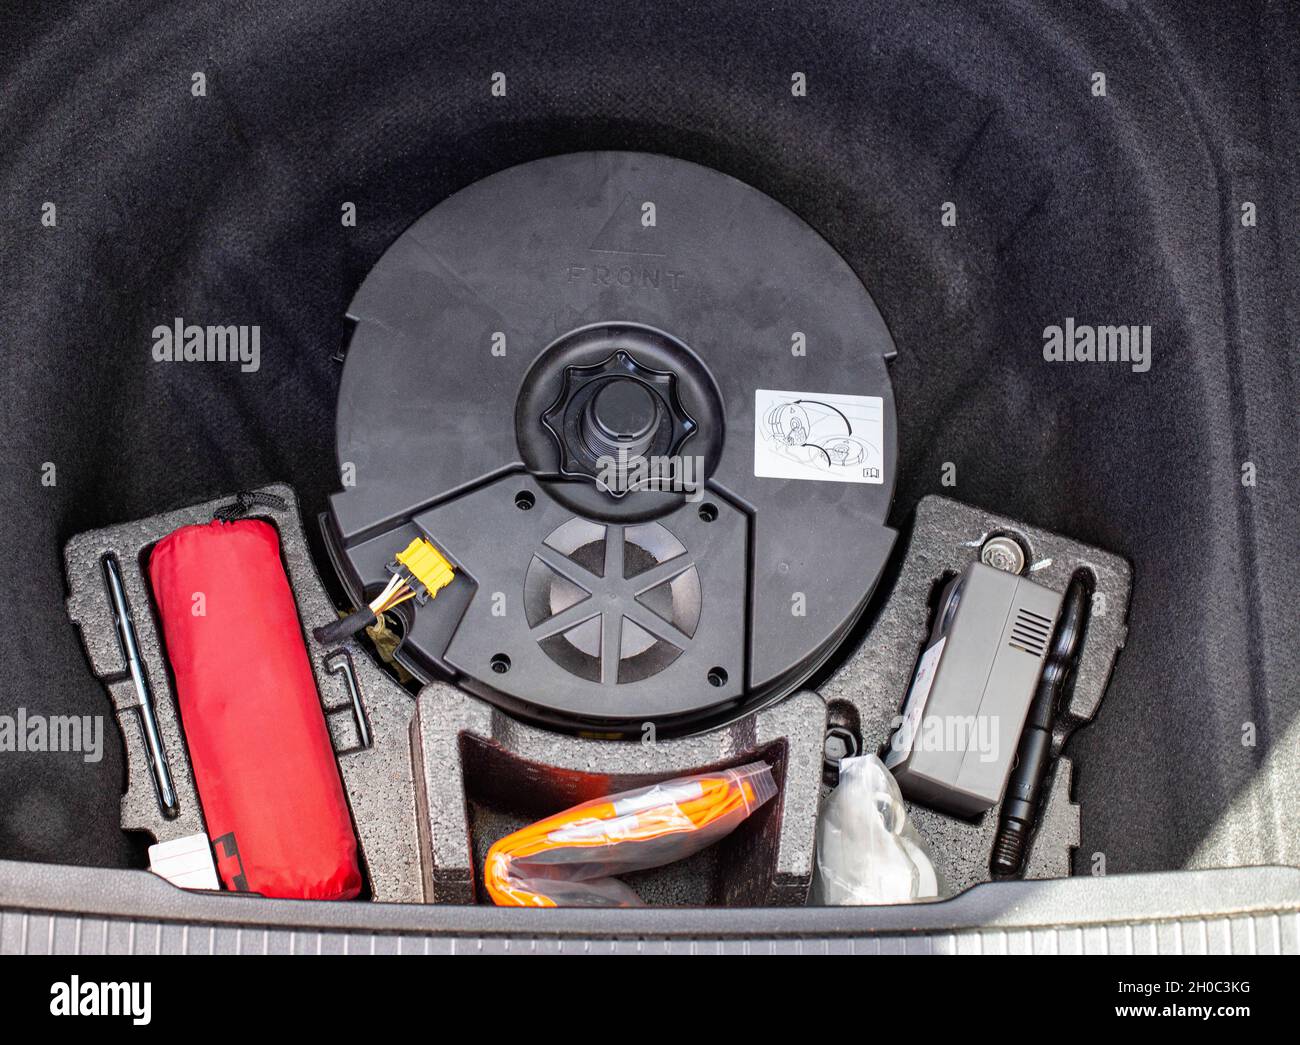 original subwoofer, first aid kit and compressor for inflating wheels in a  car trunk niche, equipment Stock Photo - Alamy